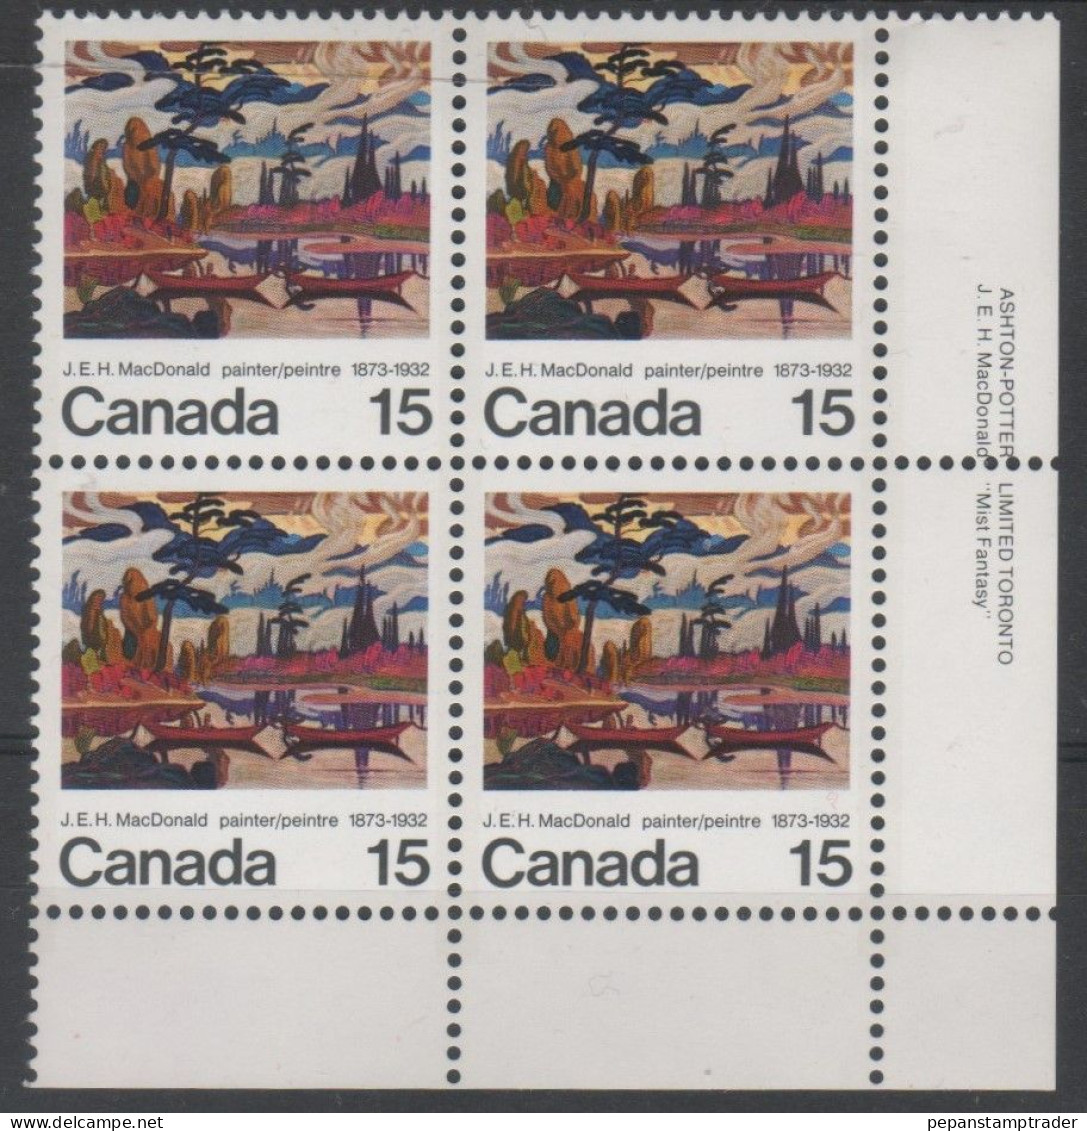 Canada - #617 - MNH PB - Num. Planches & Inscriptions Marge